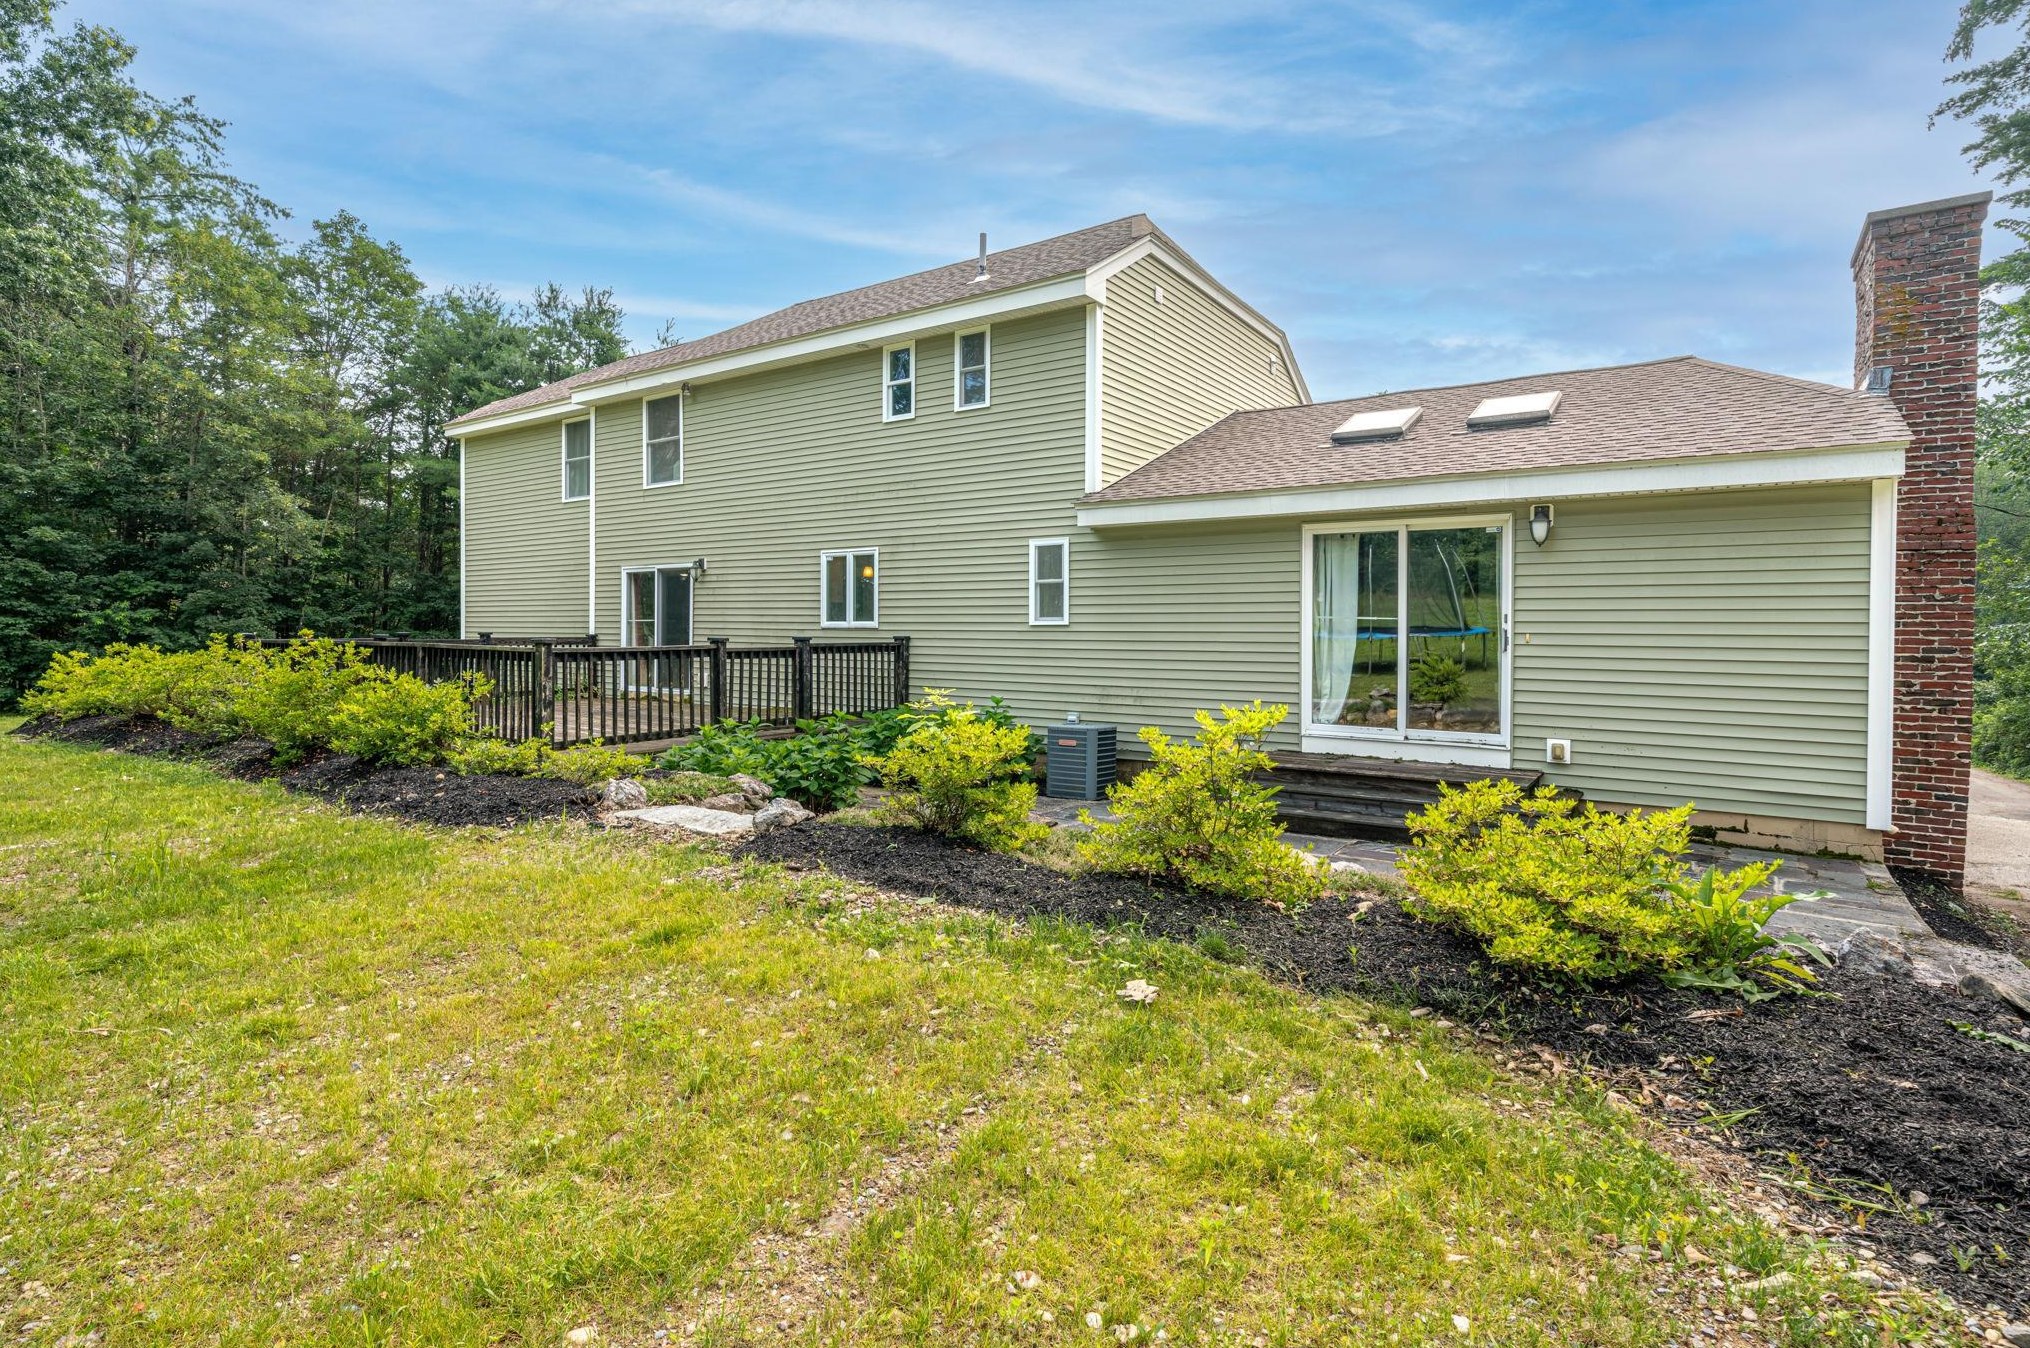 6 Lowell Rd, Windham, NH 03087